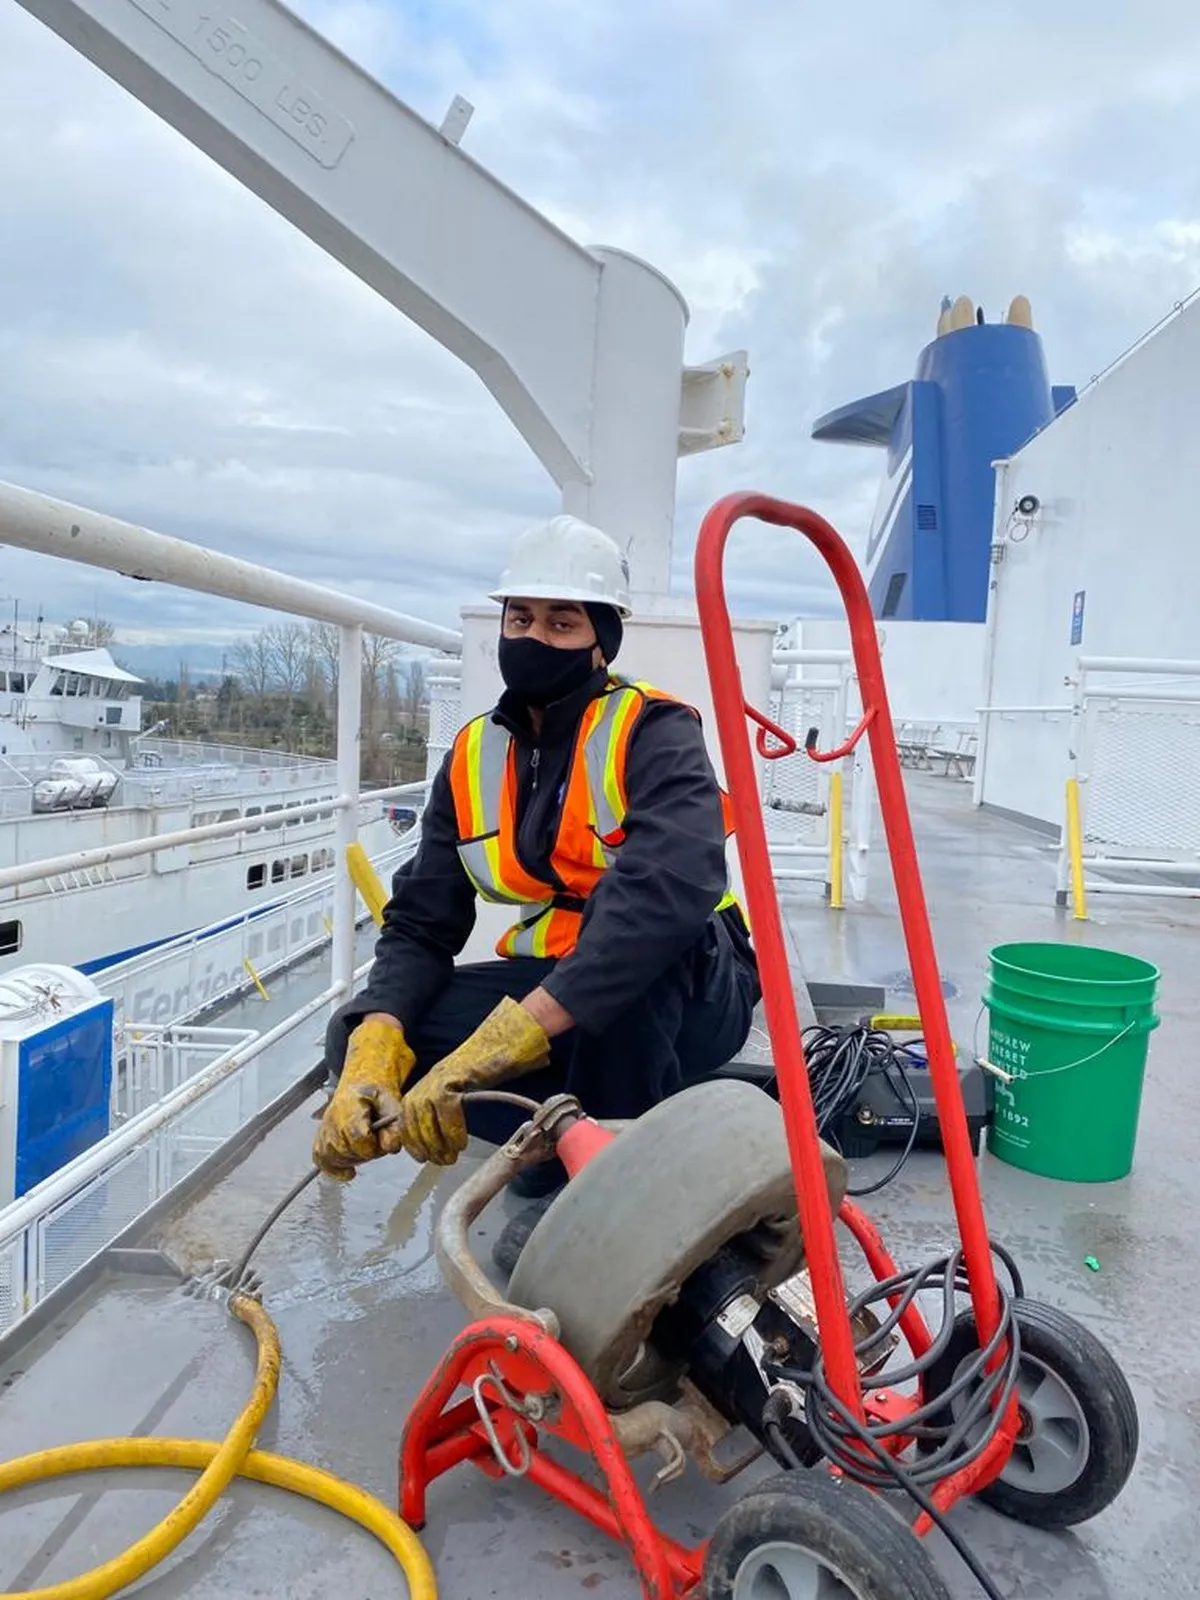 Mr. Rooter Plumbing professional clearing clogged drain on boat in Vancouver